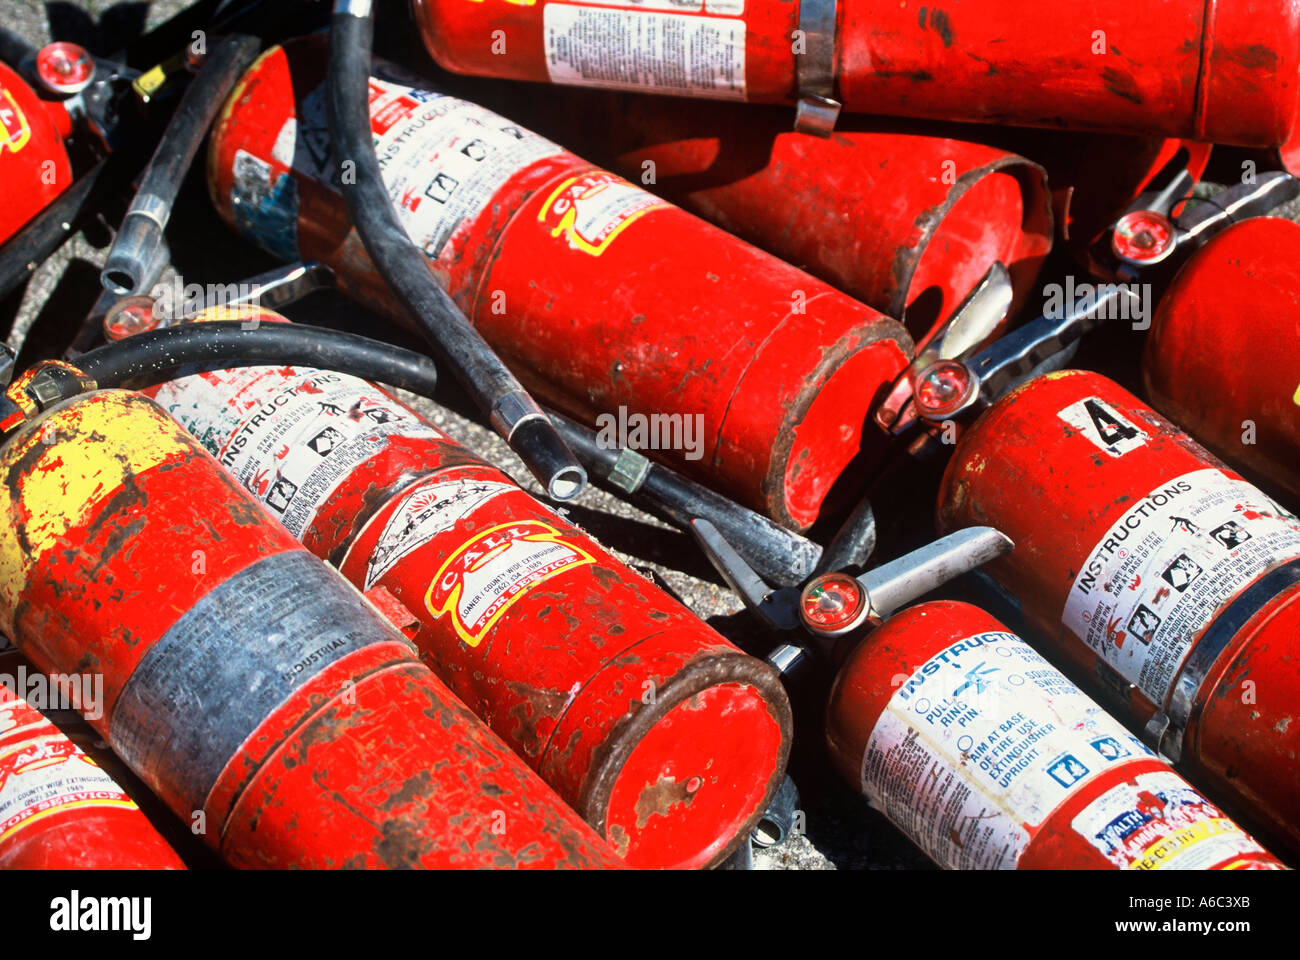 Old used extinguishers in a pile Stock Photo